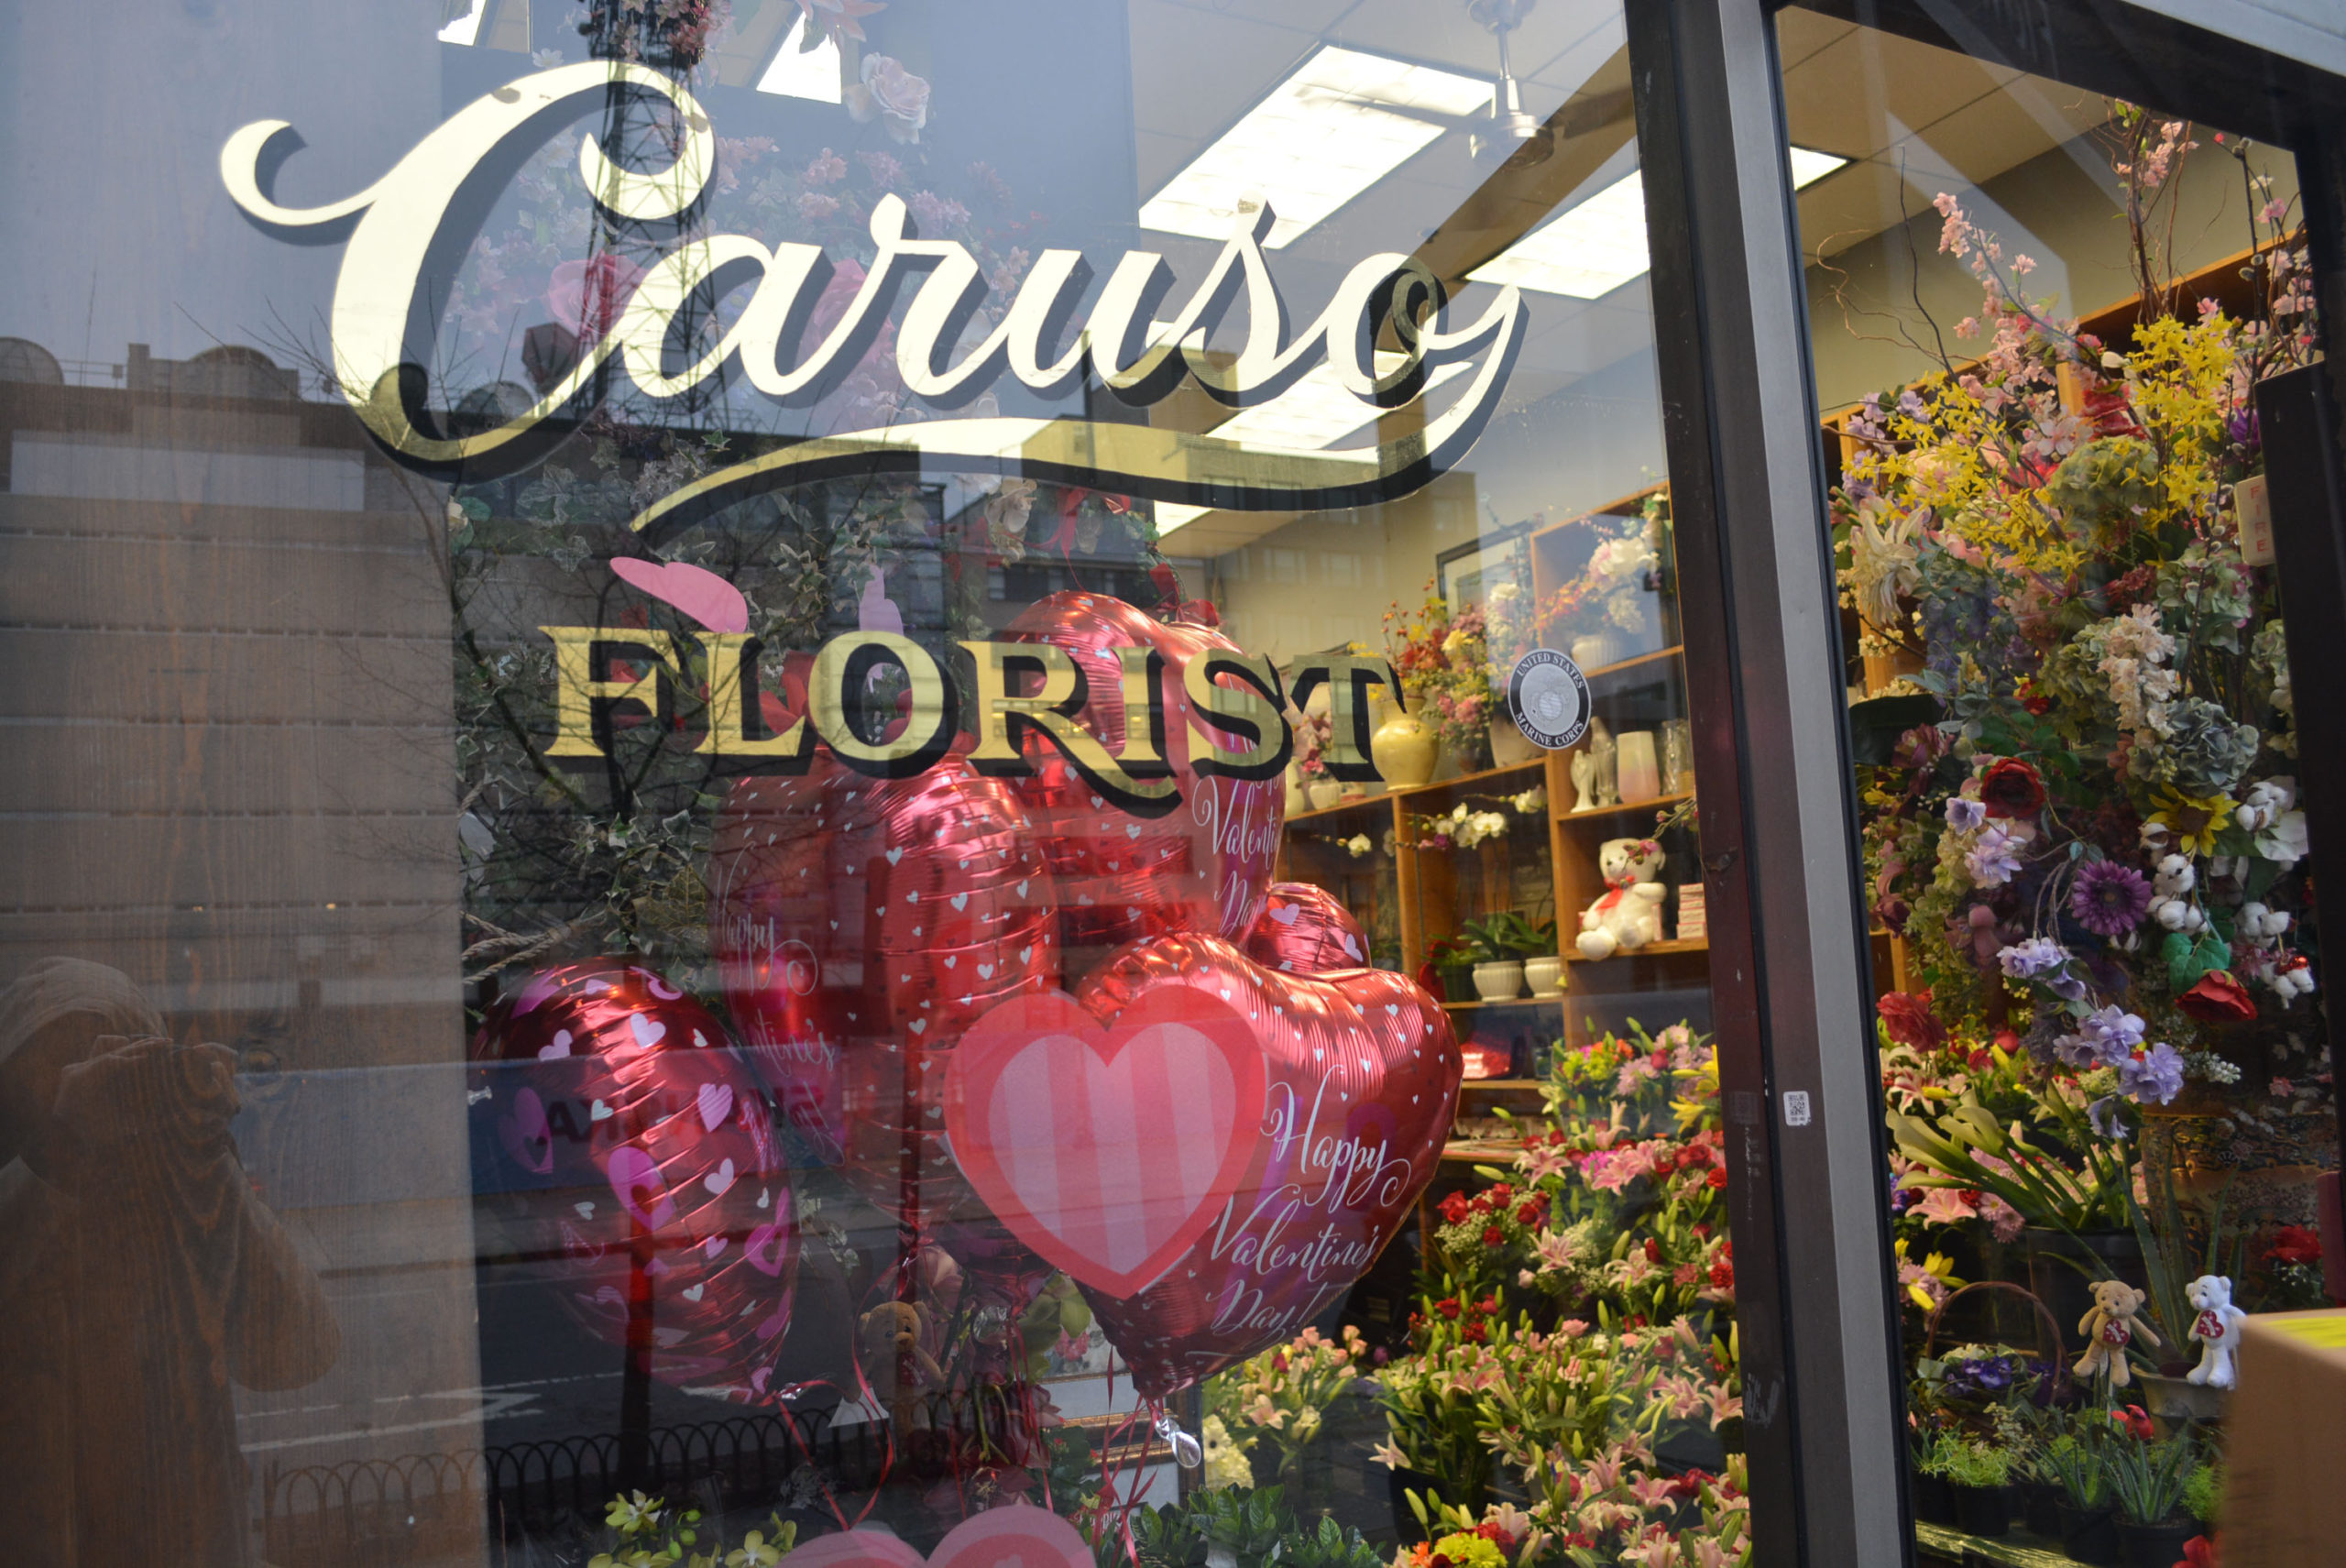 Talking the language of flowers: a family of florists in the heart of Dupont Circle